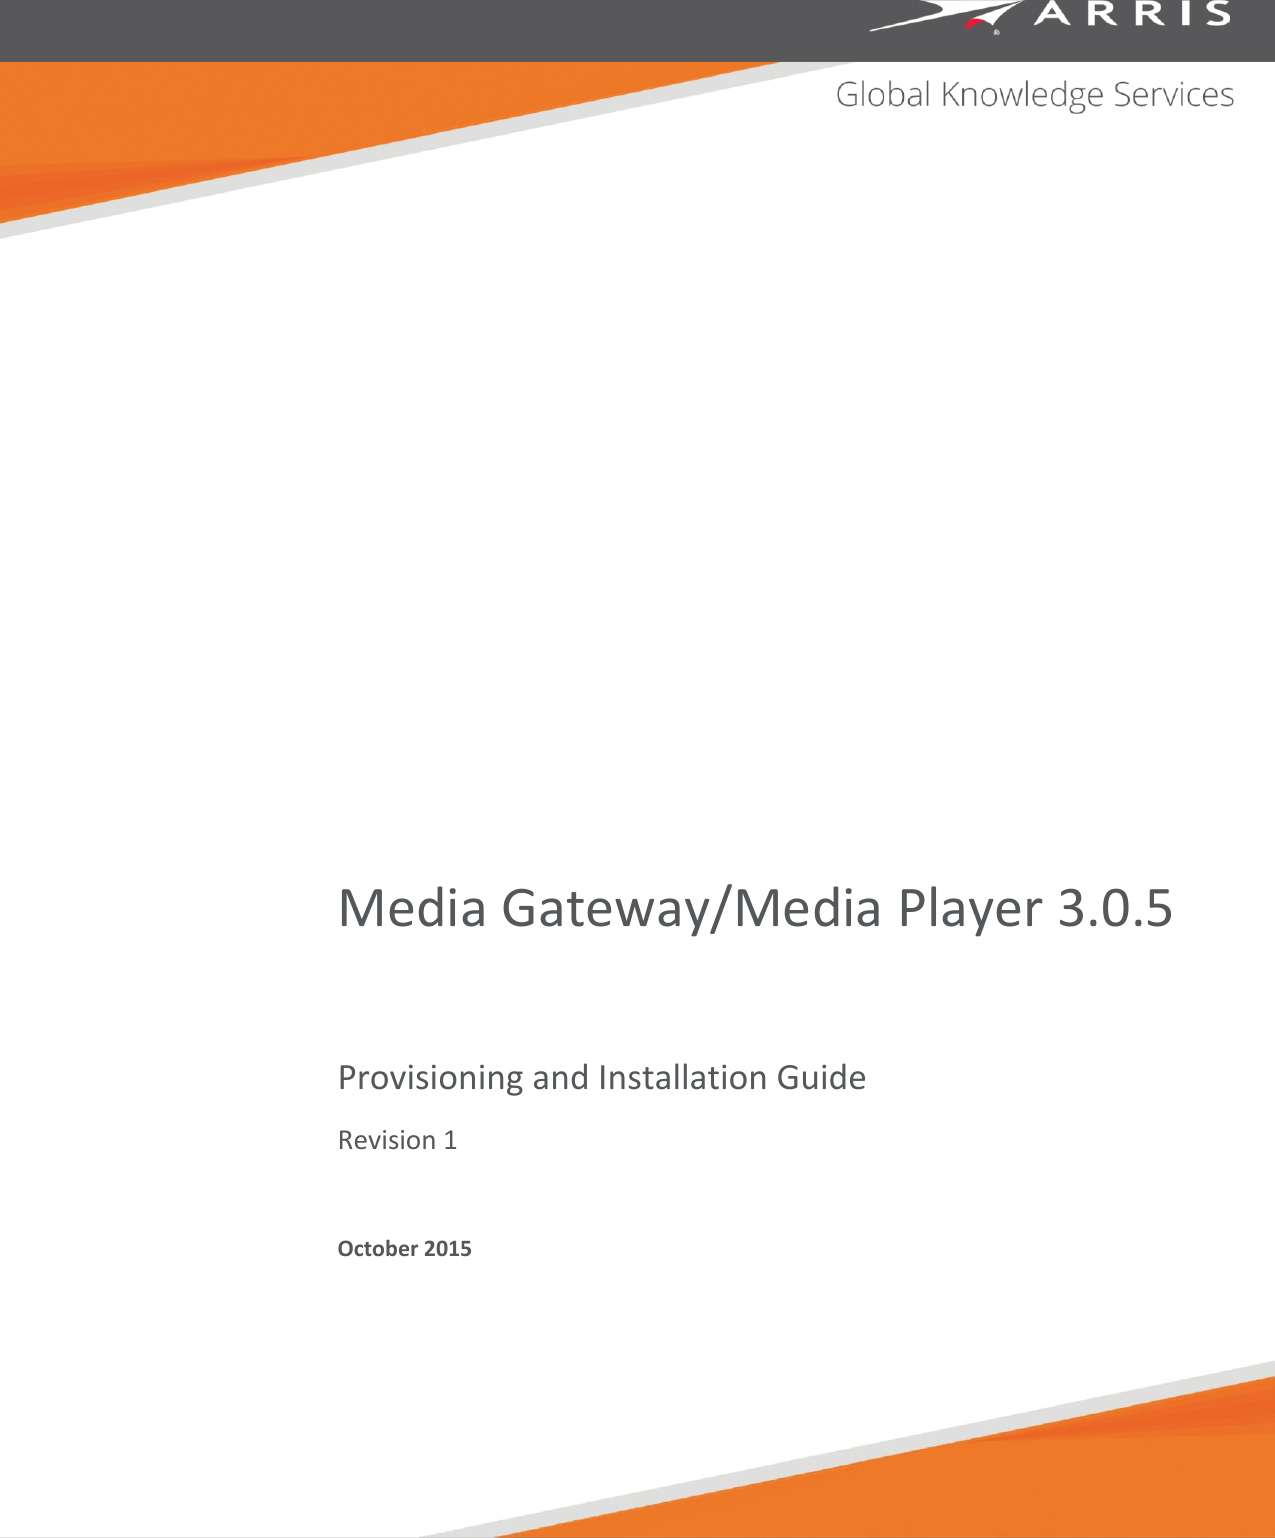   Media Gateway/Media Player 3.0.5 Provisioning and Installation Guide Revision 1 October 2015  